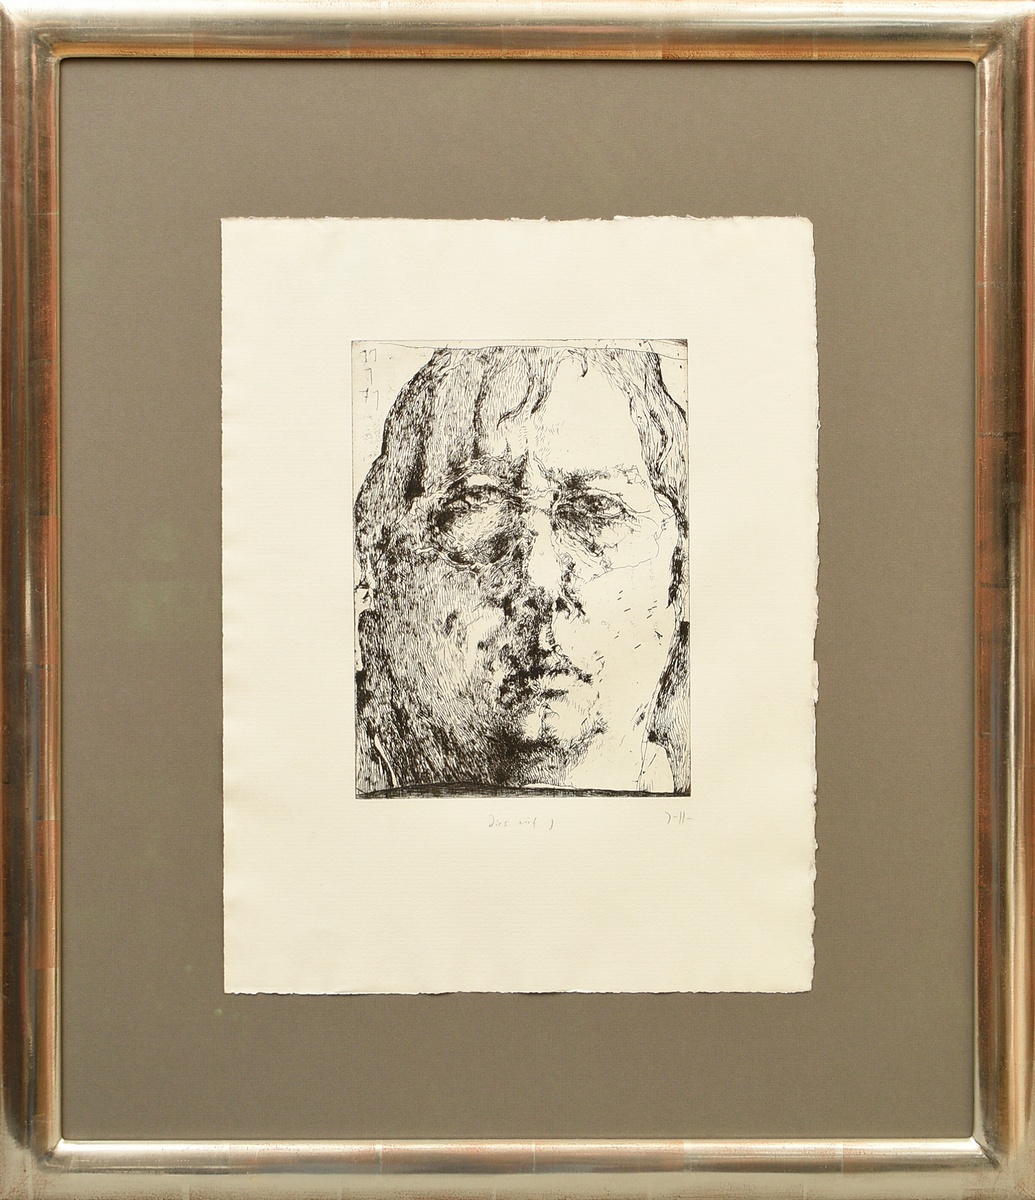 Janssen, Horst (1929-1995) 'Self' 1971, etching, sign./inscr. below, dat. on plate, wide silver-pla - Image 2 of 3